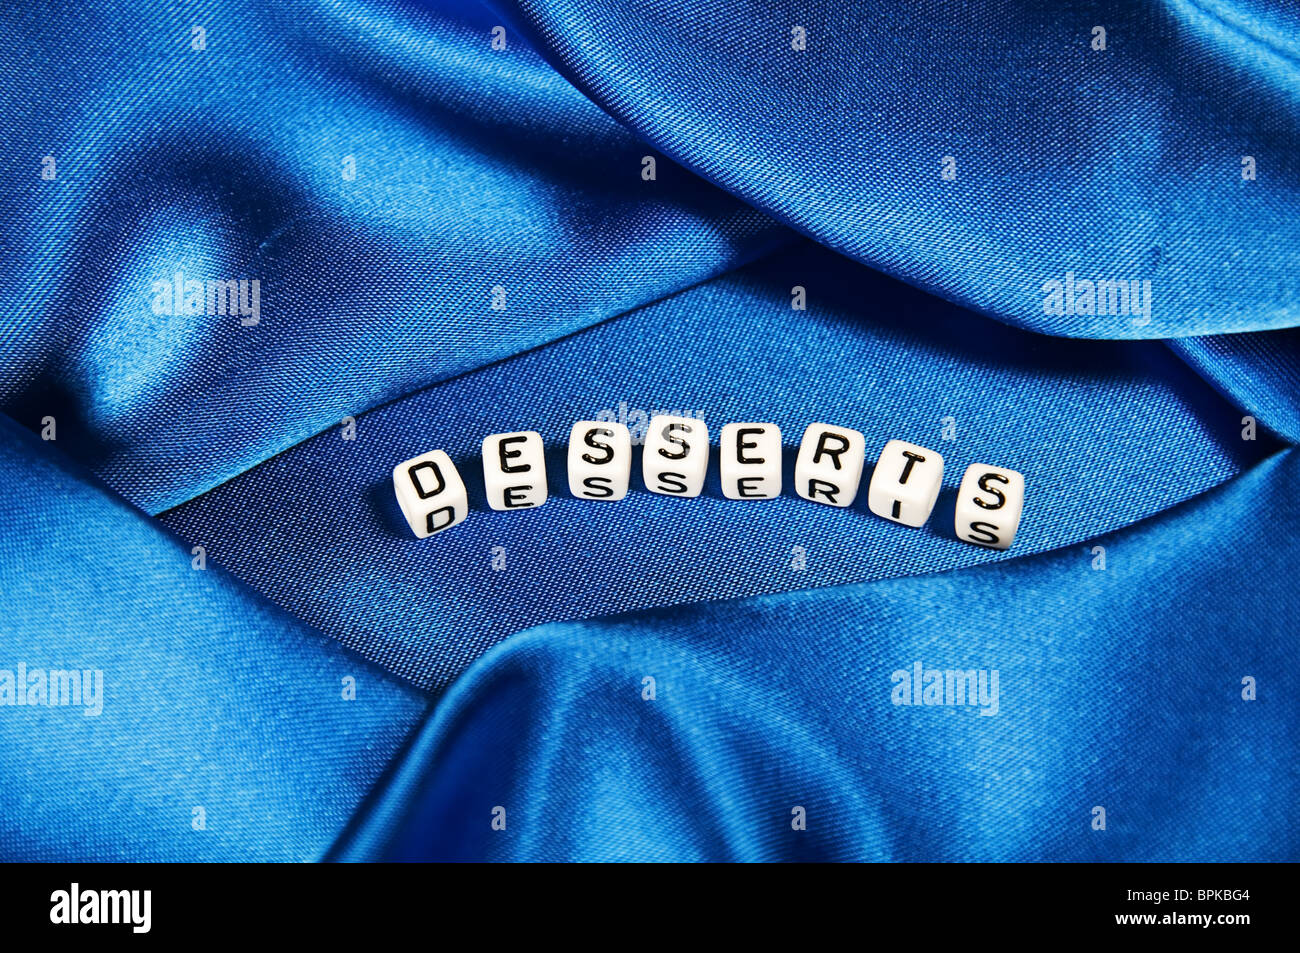 This series has a royal blue shiny background with the word desserts in black and white cube lettering. Stock Photo